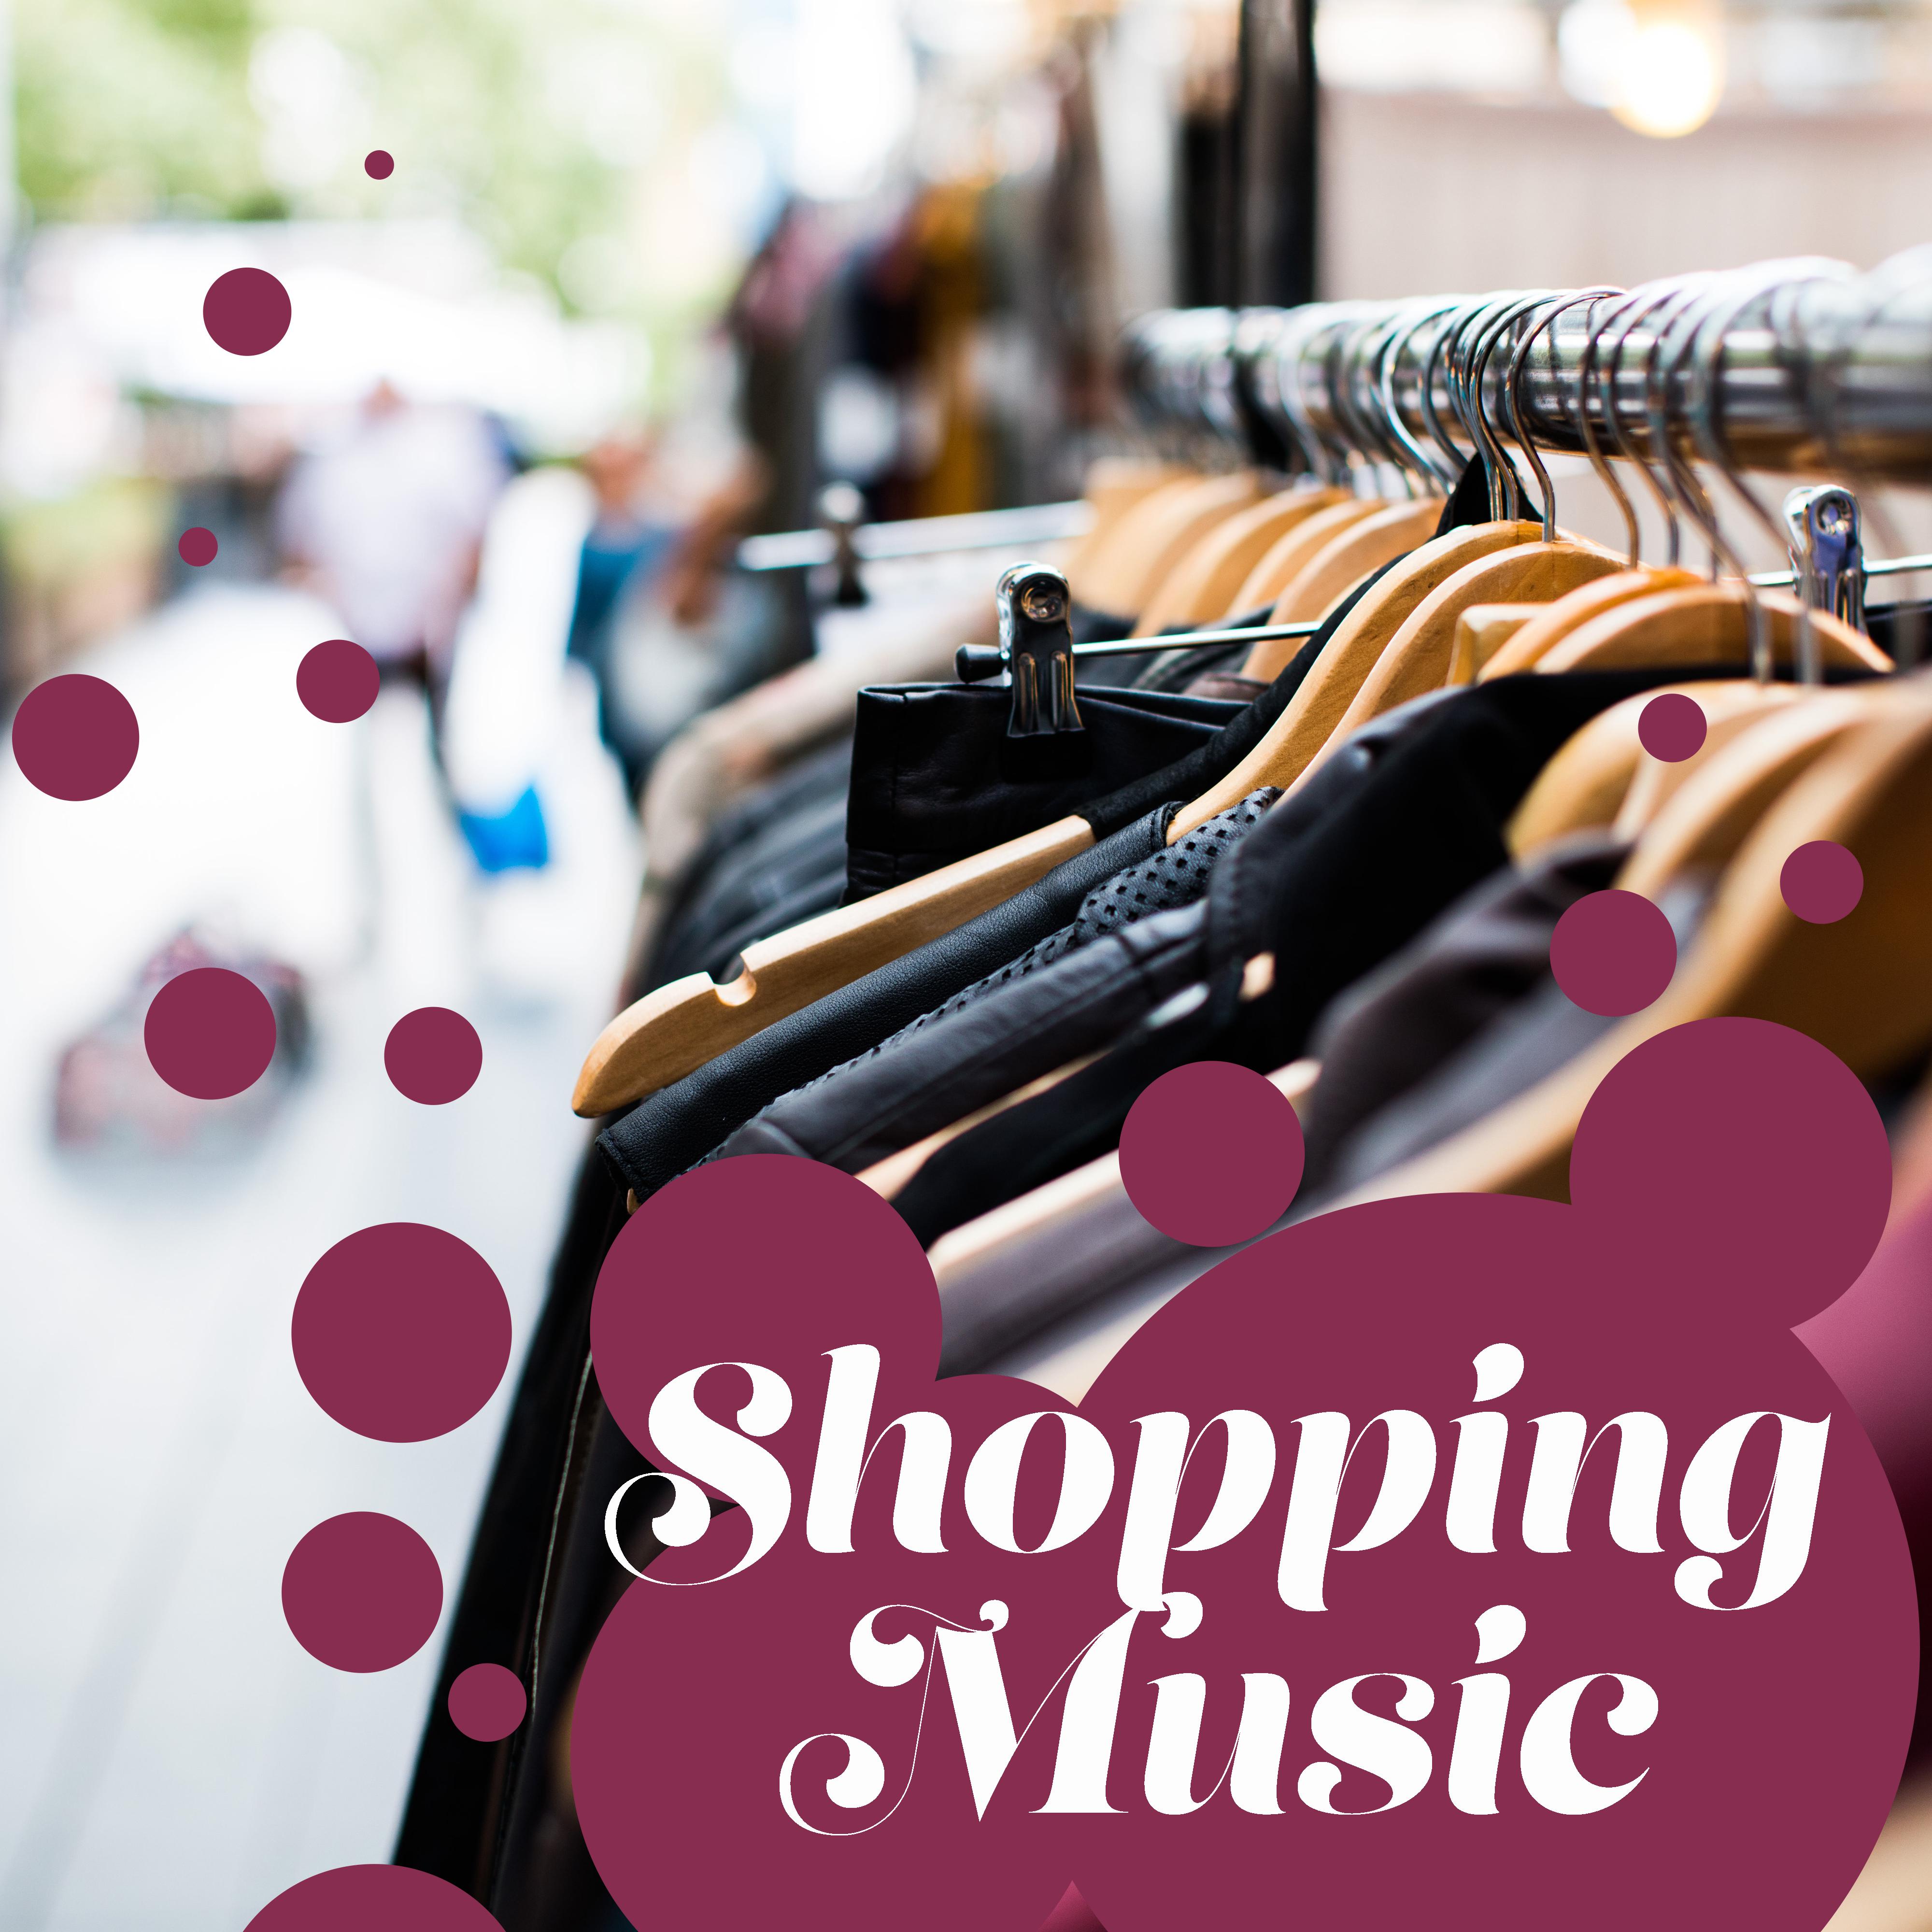 Shopping Music  Instrumental Jazz for Relaxation, Perfect Day, Piano Music, Gentle Guitar, Coffee Shop, Shopping Jazz